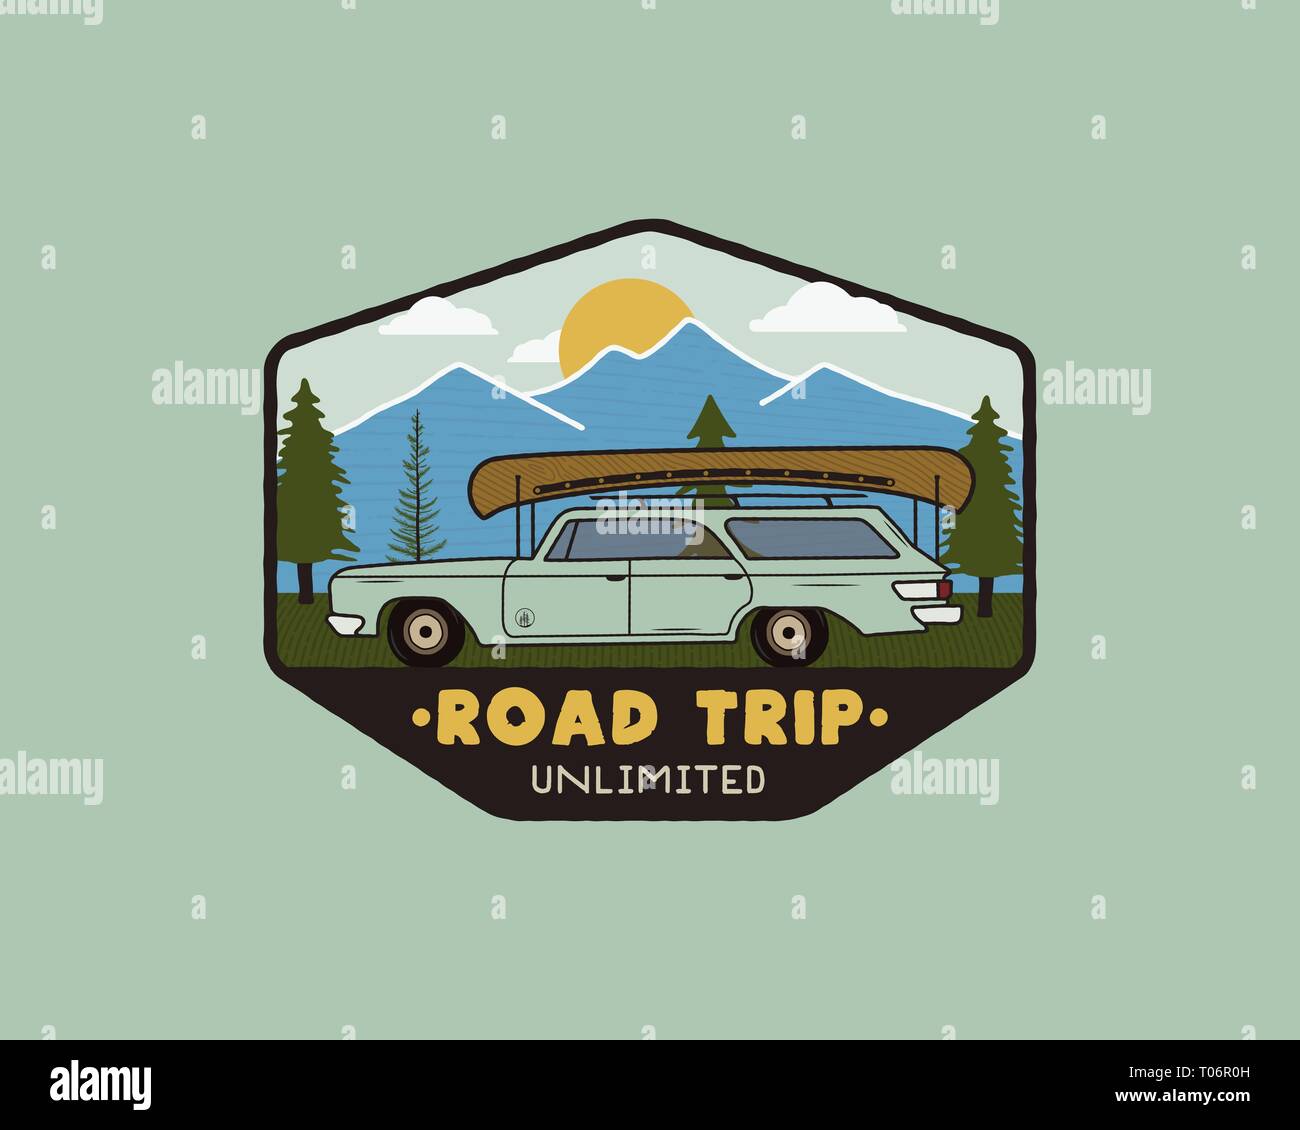 Vintage hand drawn road trip logo patch with carriding through the mountains landscape and quote - Road trip unlimited. Old style outdoors camping Stock Vector